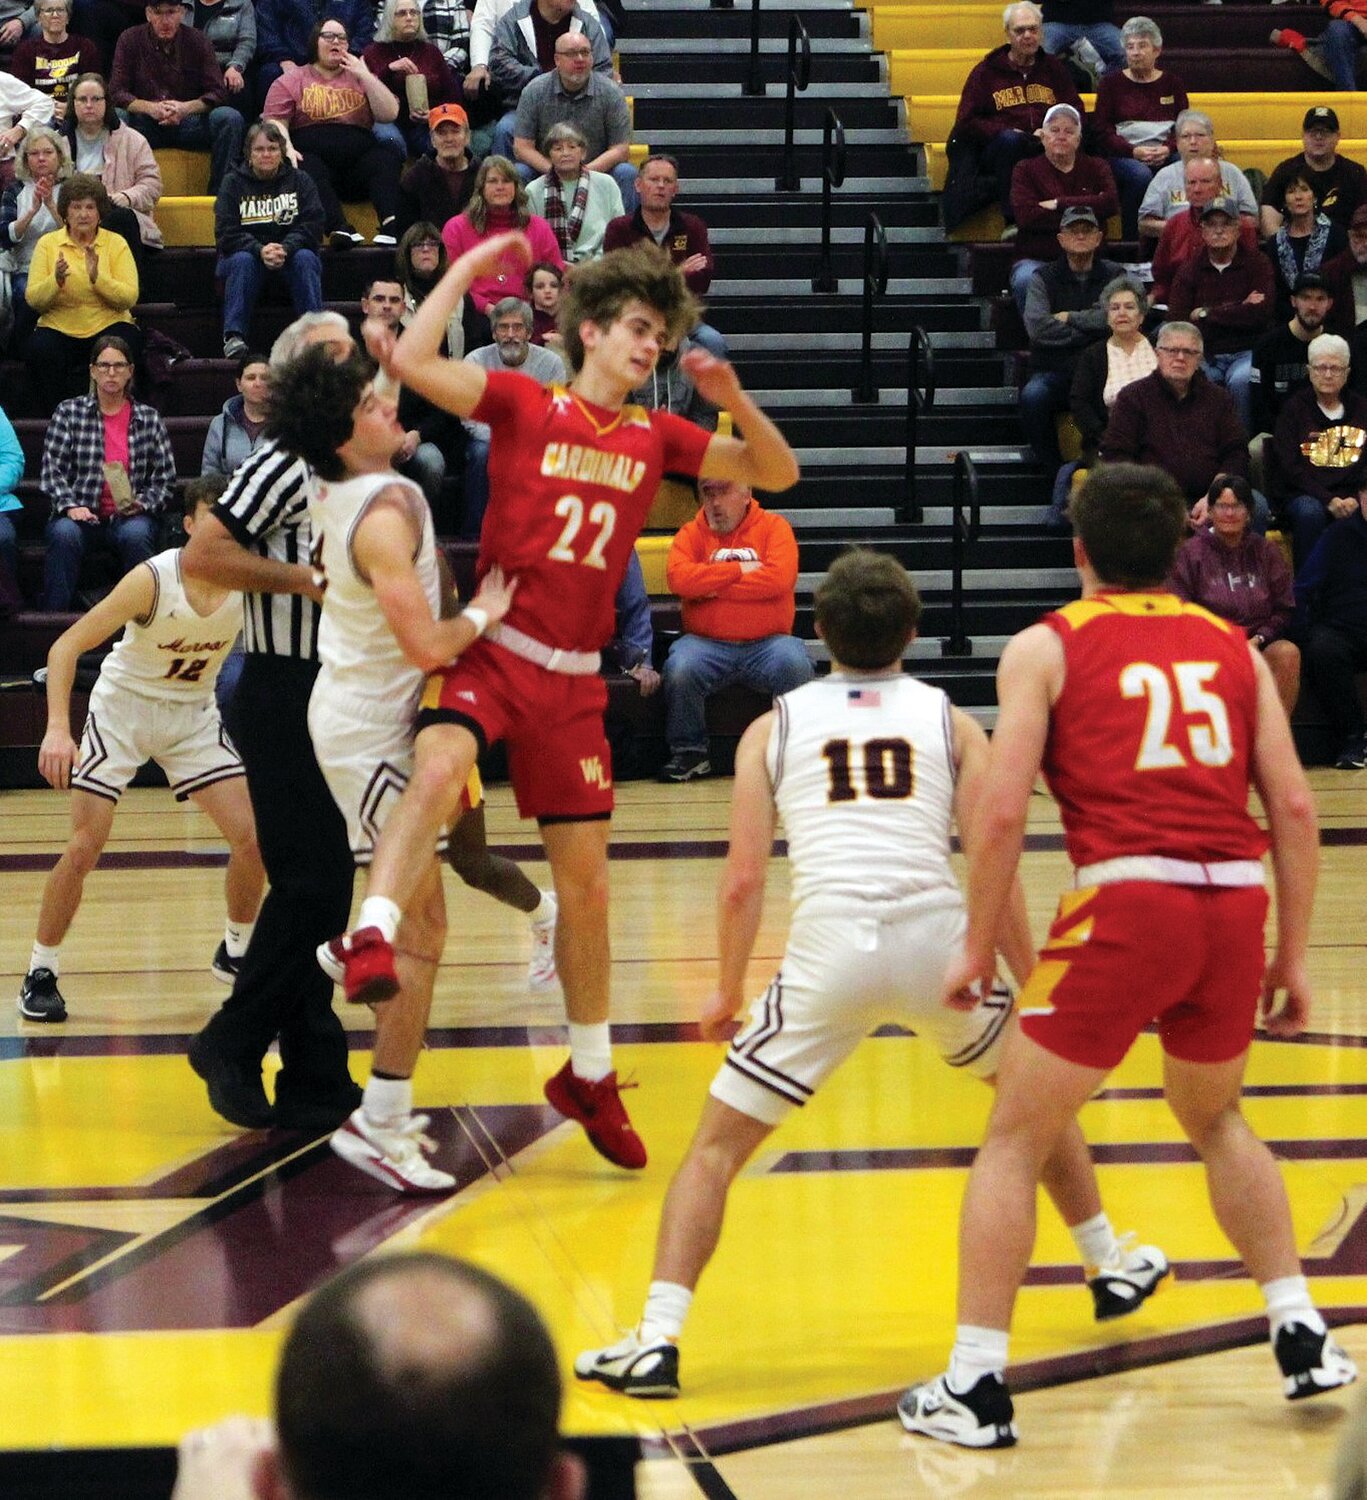 The jump ball goes to the Maroons who then turn it over to the opposition.